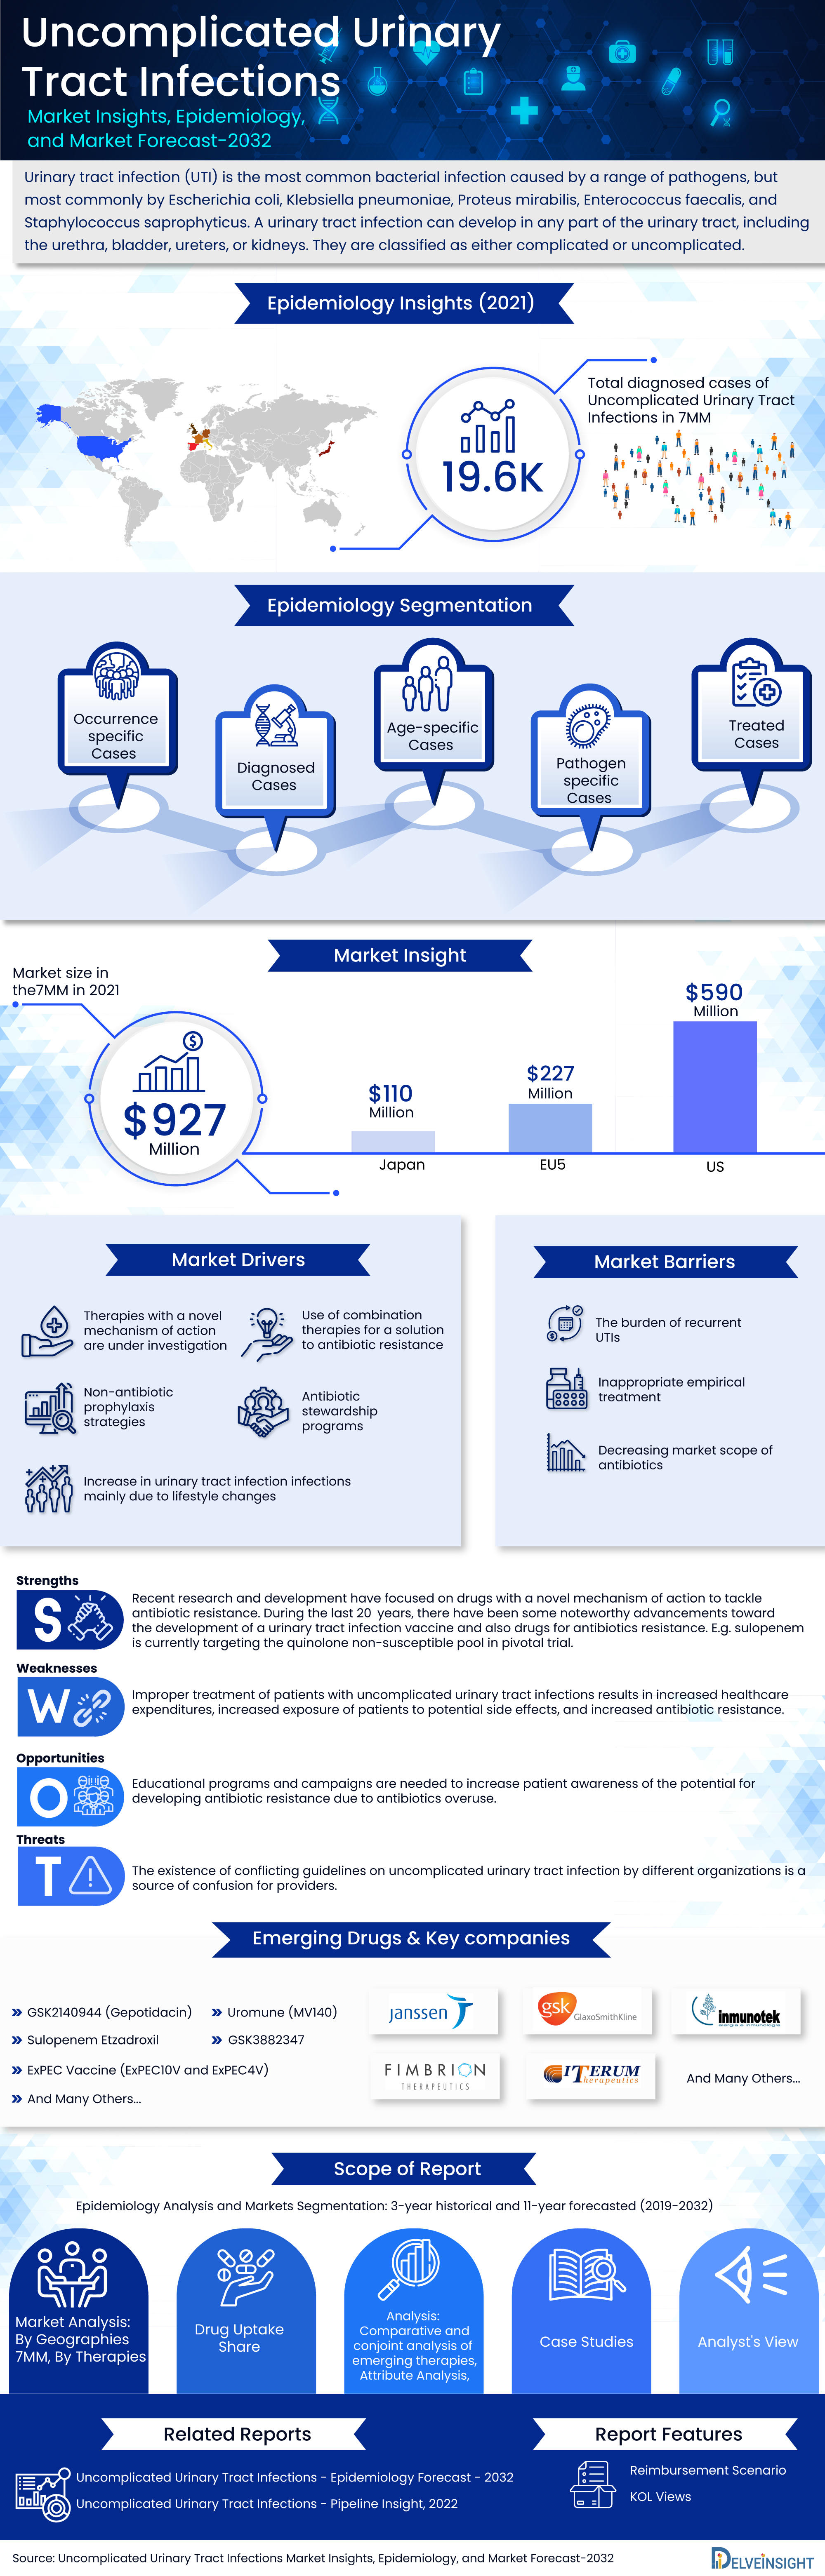 Uncomplicated Urinary Tract Infections Market Infographic